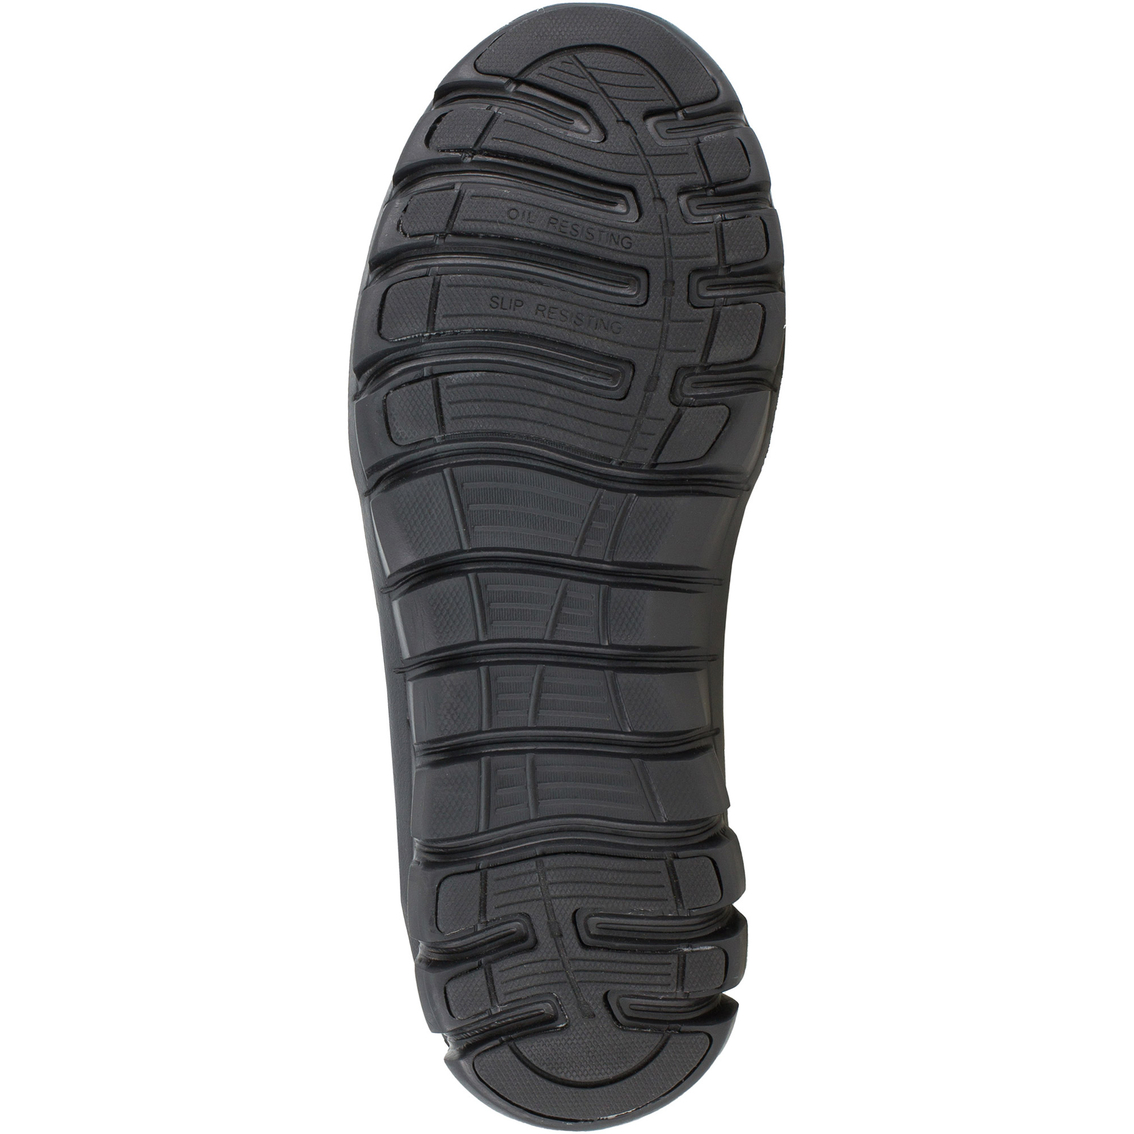 Reebok Sublite Cushion 8 in. Tactical Boots - Image 5 of 5